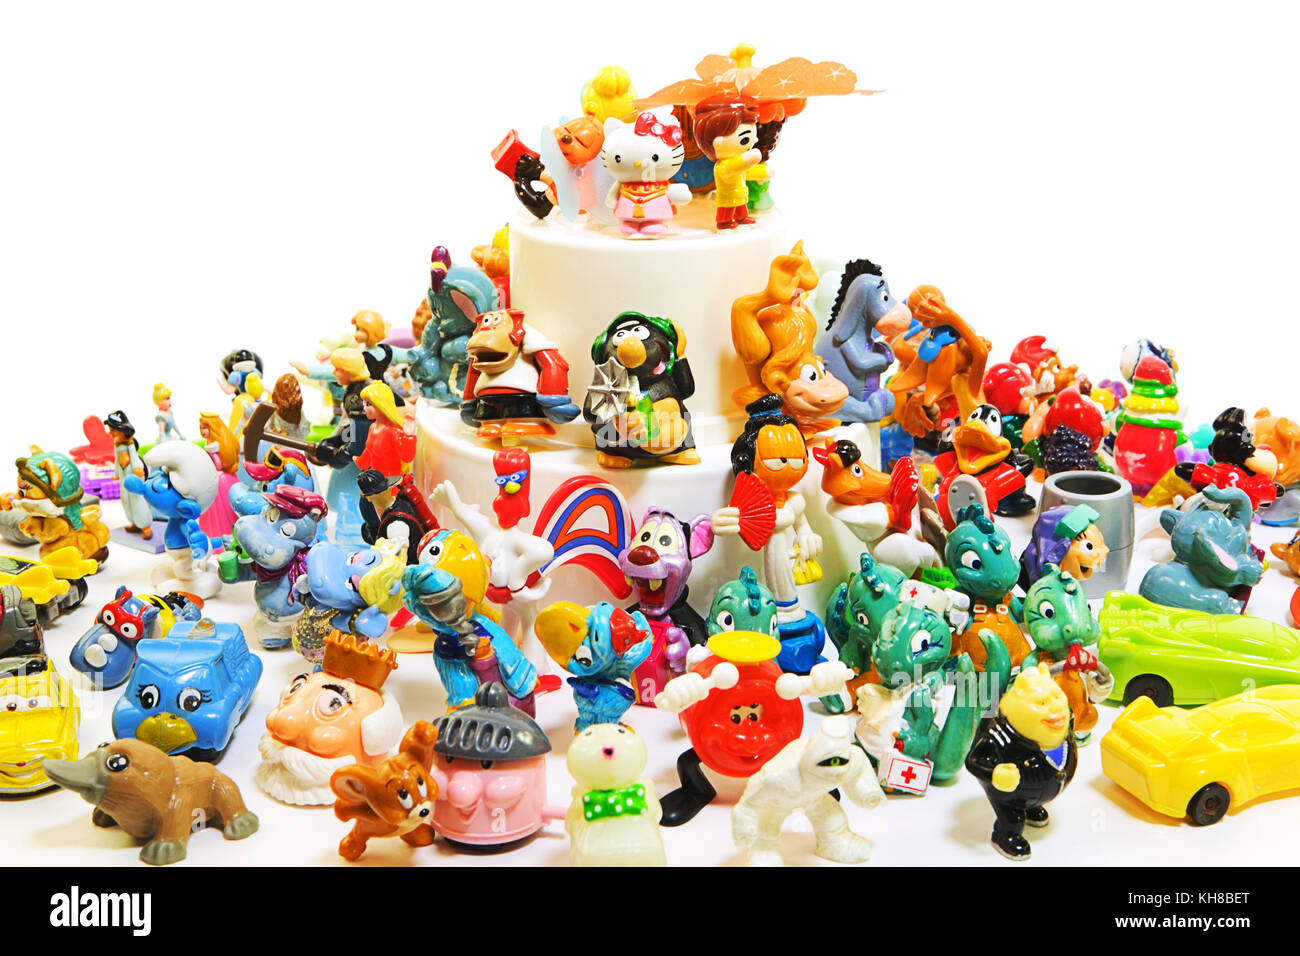 Old toys Kinder Surprise and other small toys Stock Photo